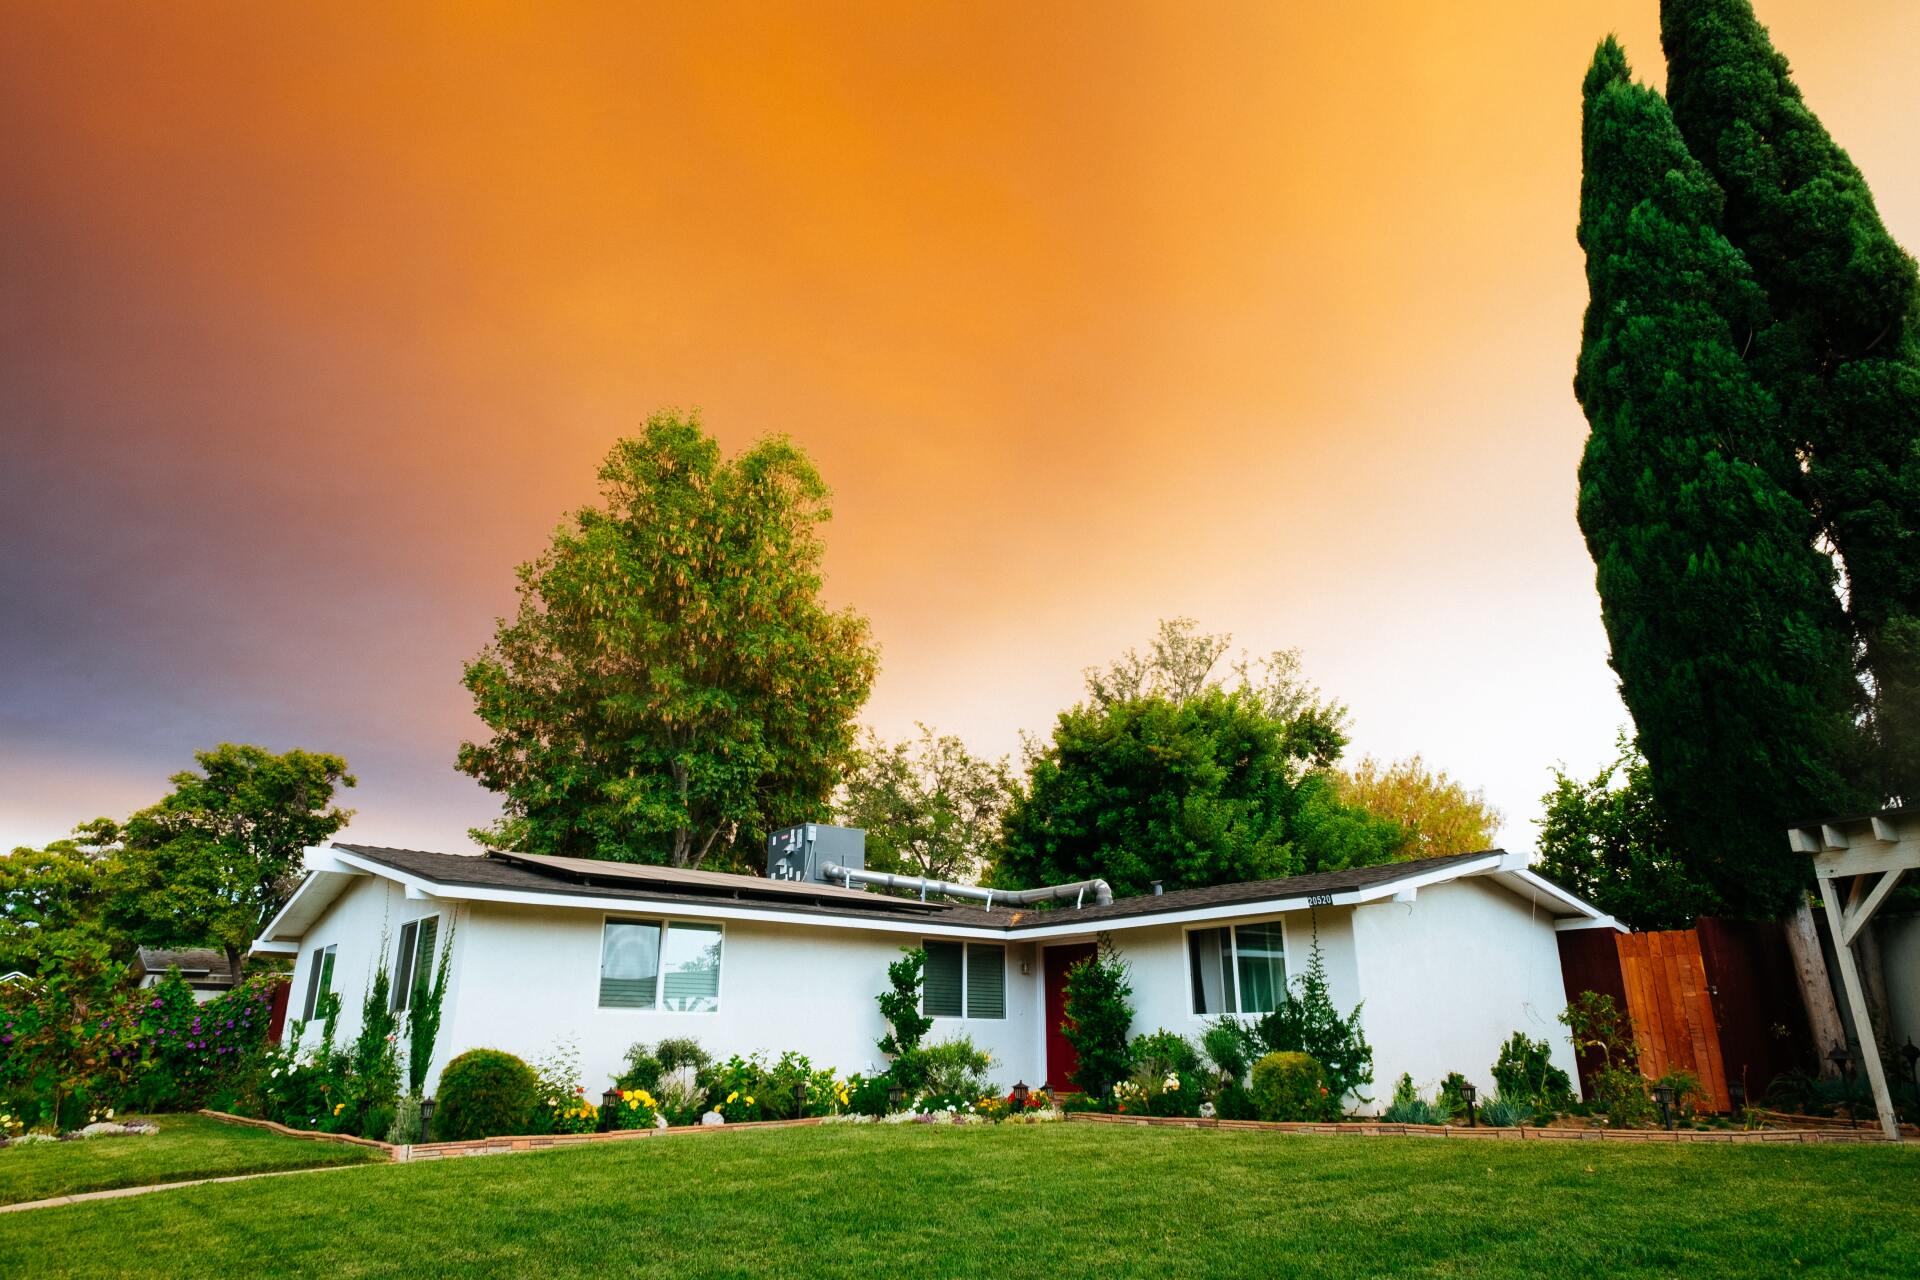 Sunset casts a warm orange glow over a charming house with a lush green lawn and majestic trees.